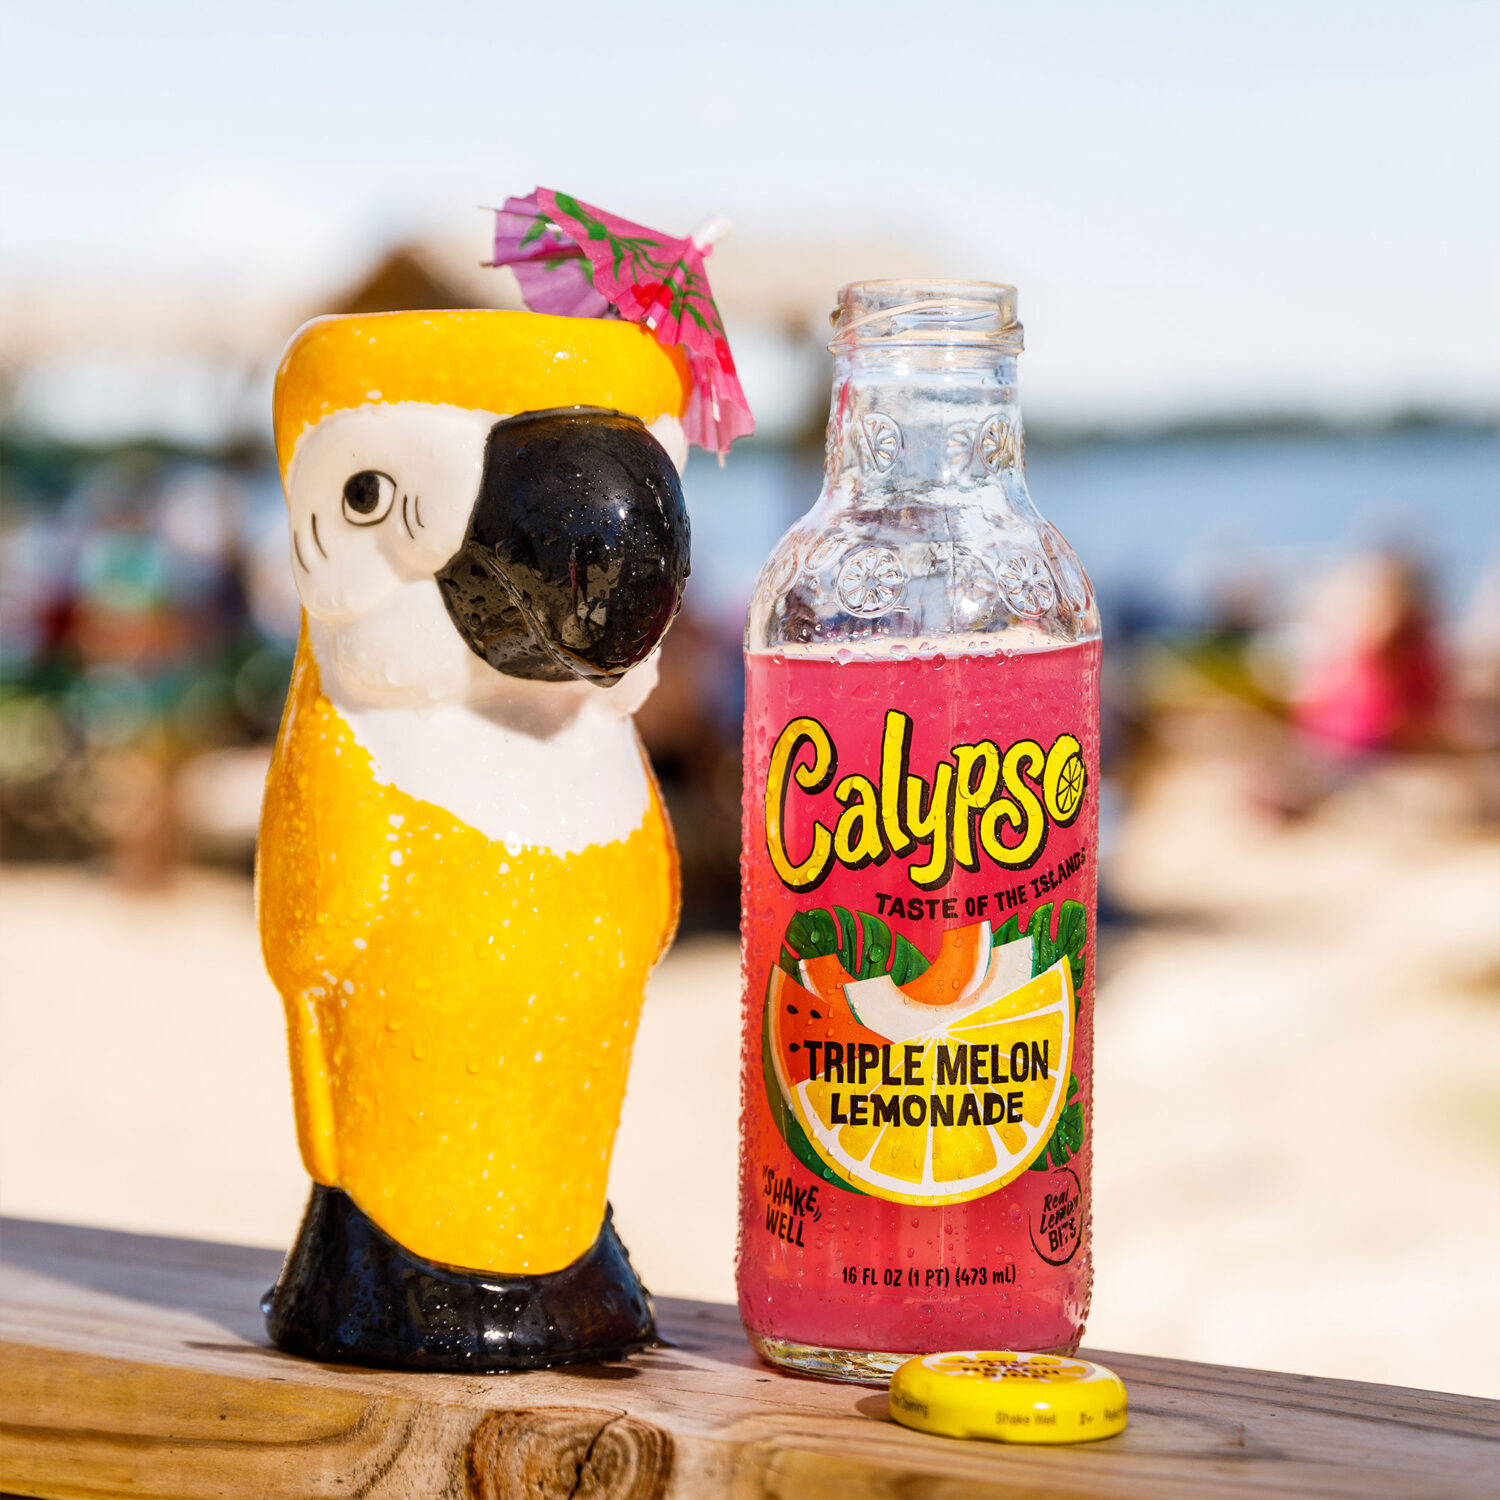 Calypso Triple Melon Lemonade cocktail in a parrot cup with an umbrella.